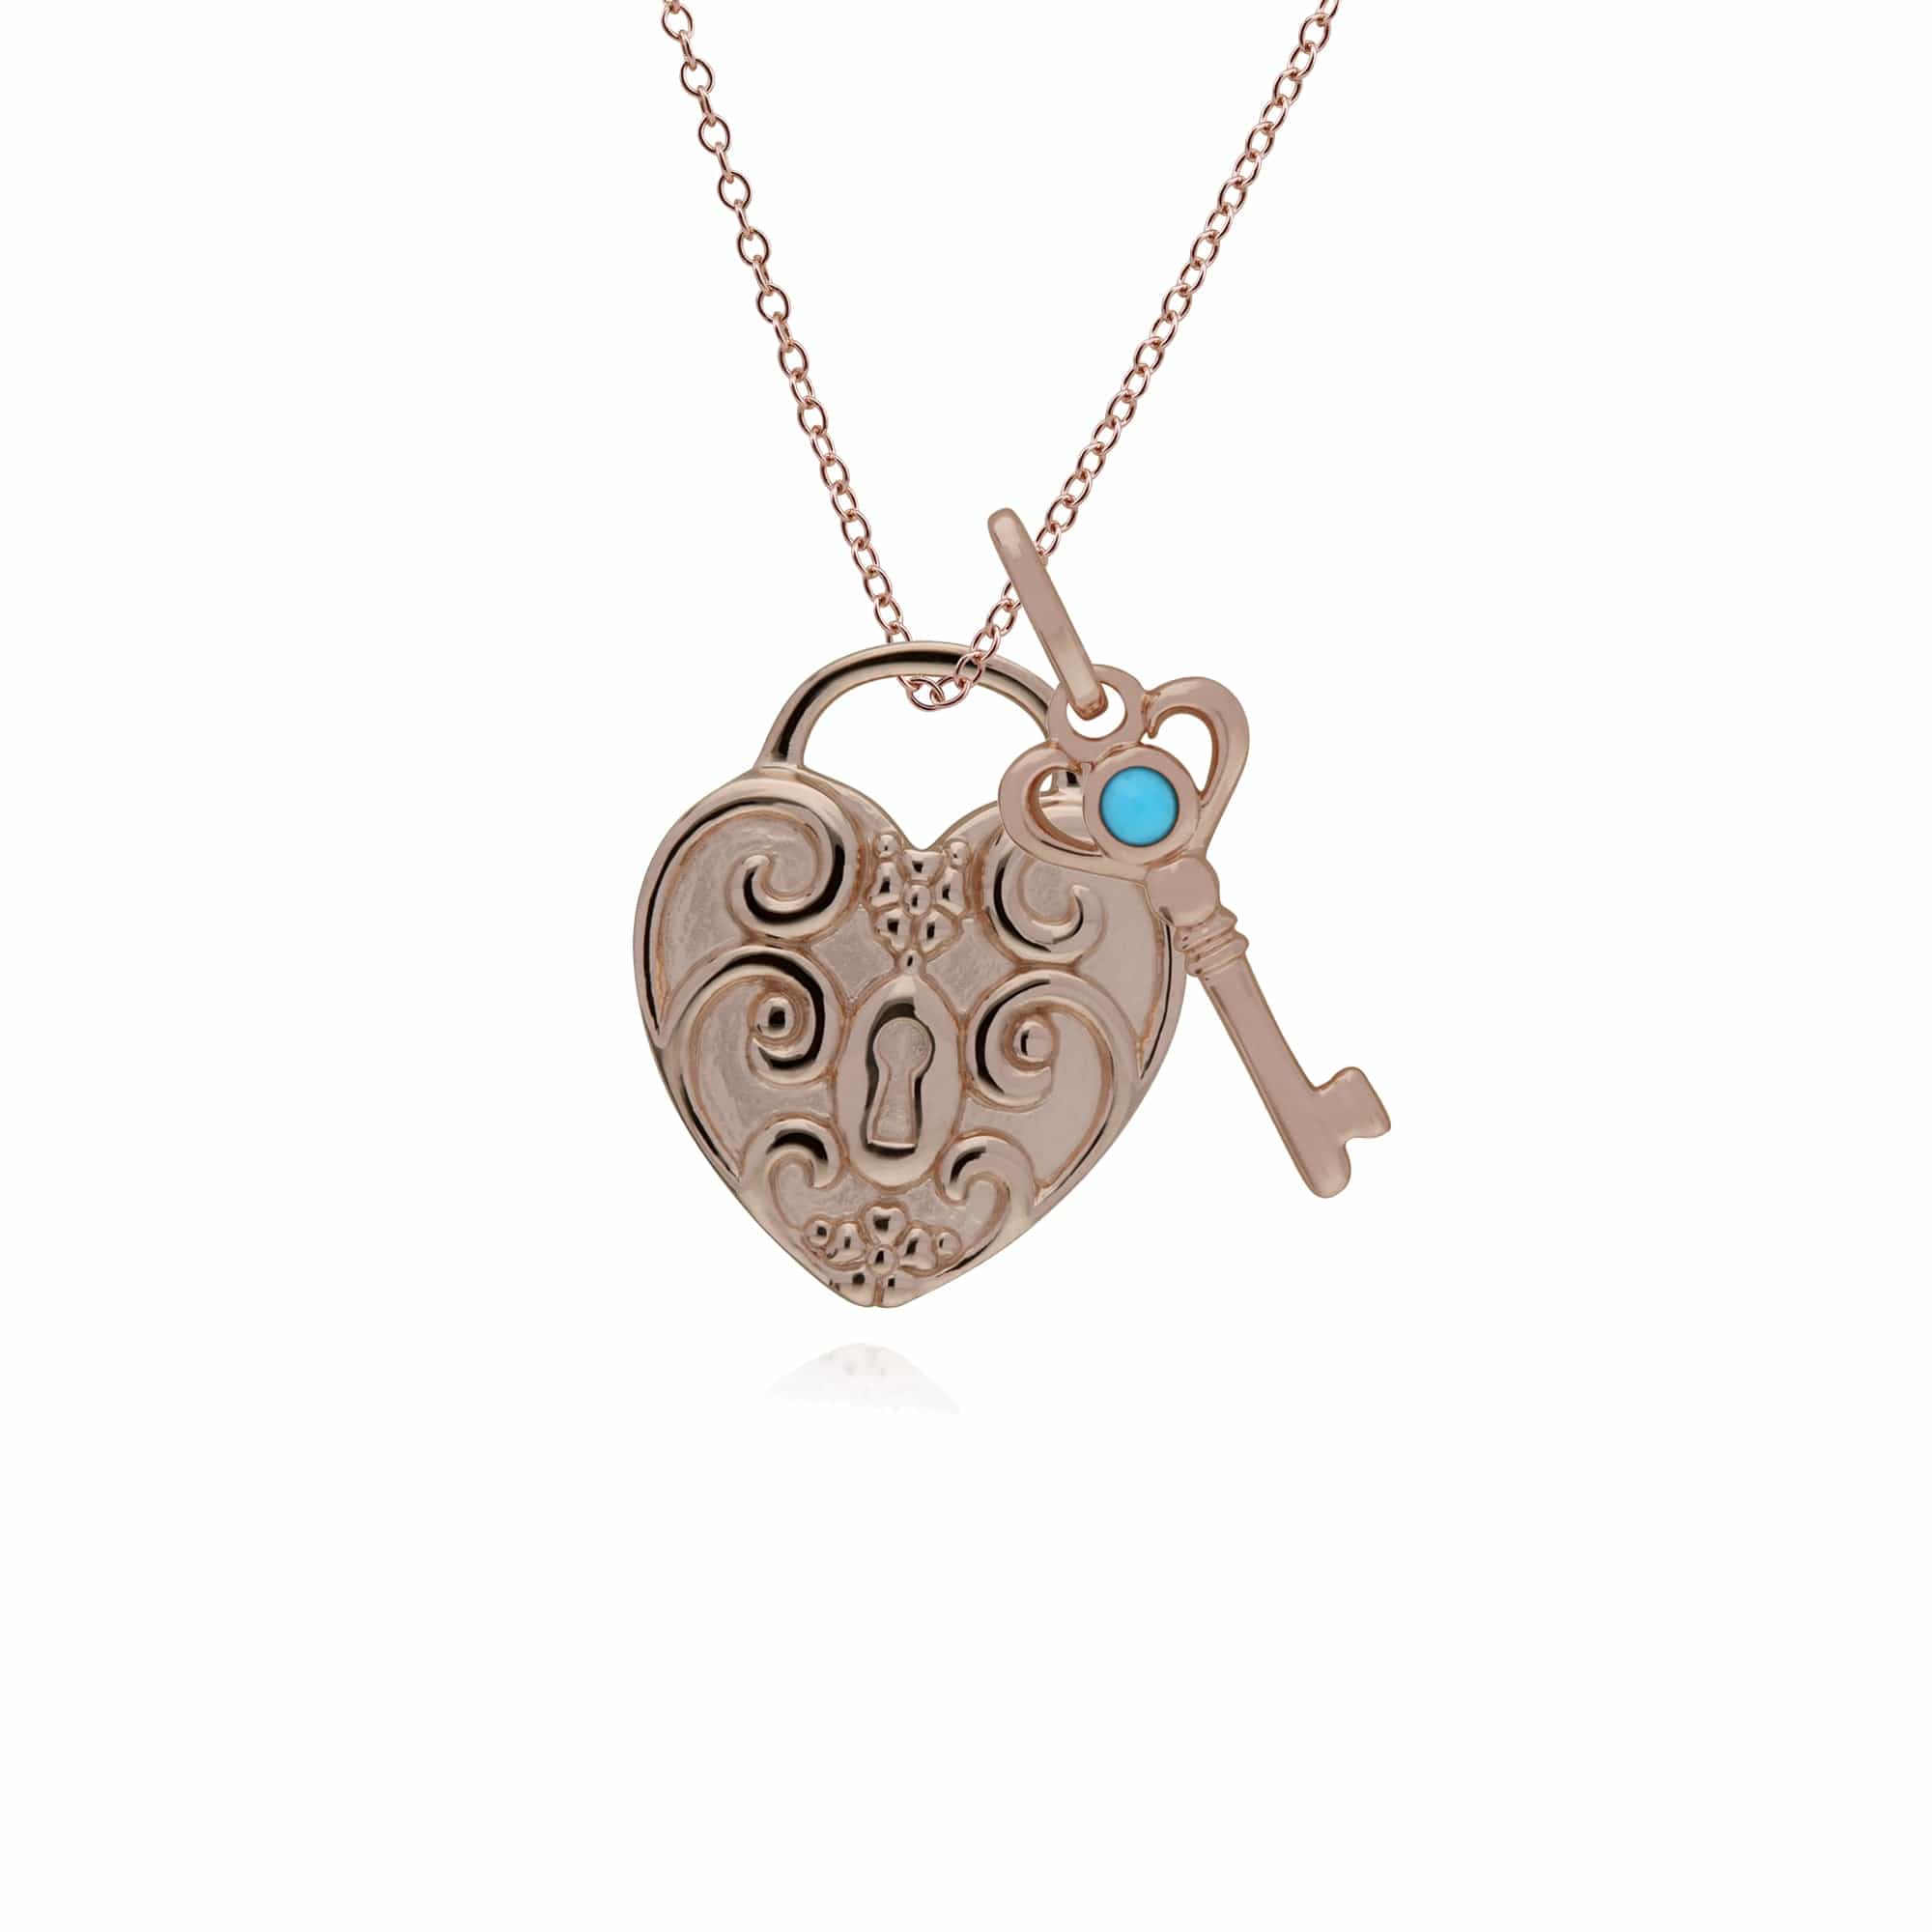 270P027402925-270P026501925 Classic Swirl Heart Lock Pendant & Turquoise Key Charm in Rose Gold Plated 925 Sterling Silver 1